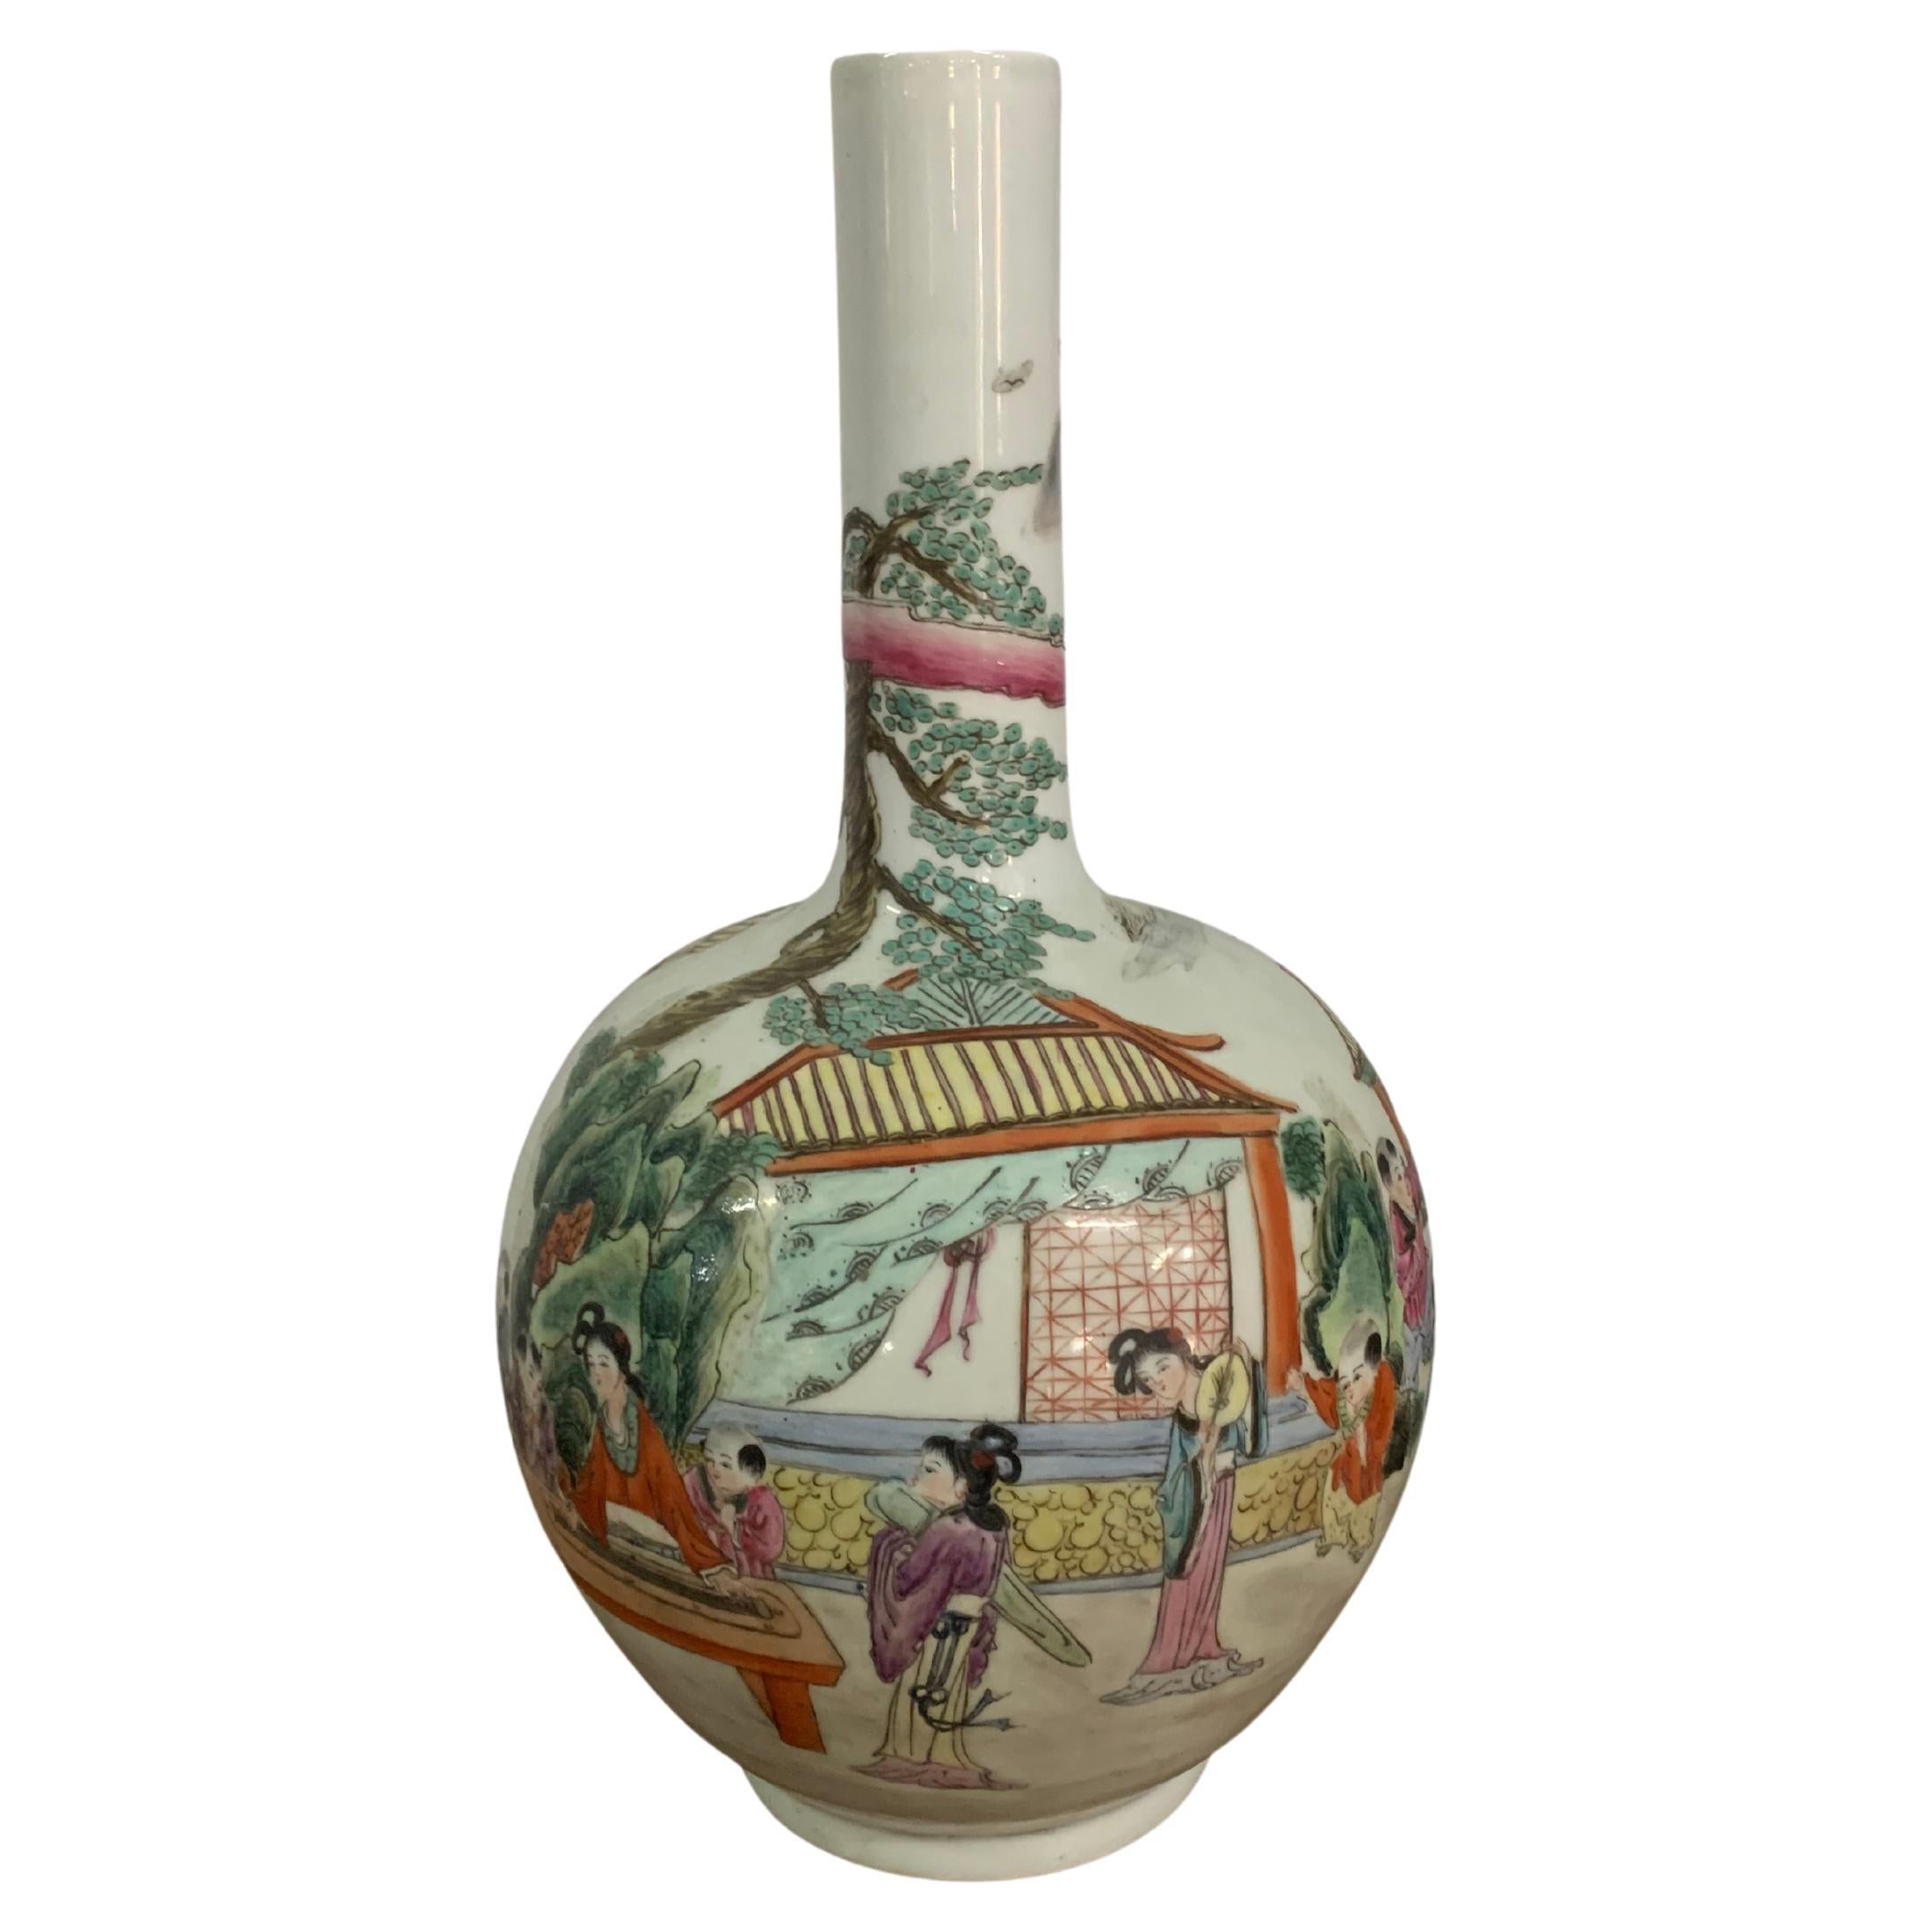 Chinese "Famille Rose Rouleau" Vase with Wonderful Handpainted Detail, c. 1950